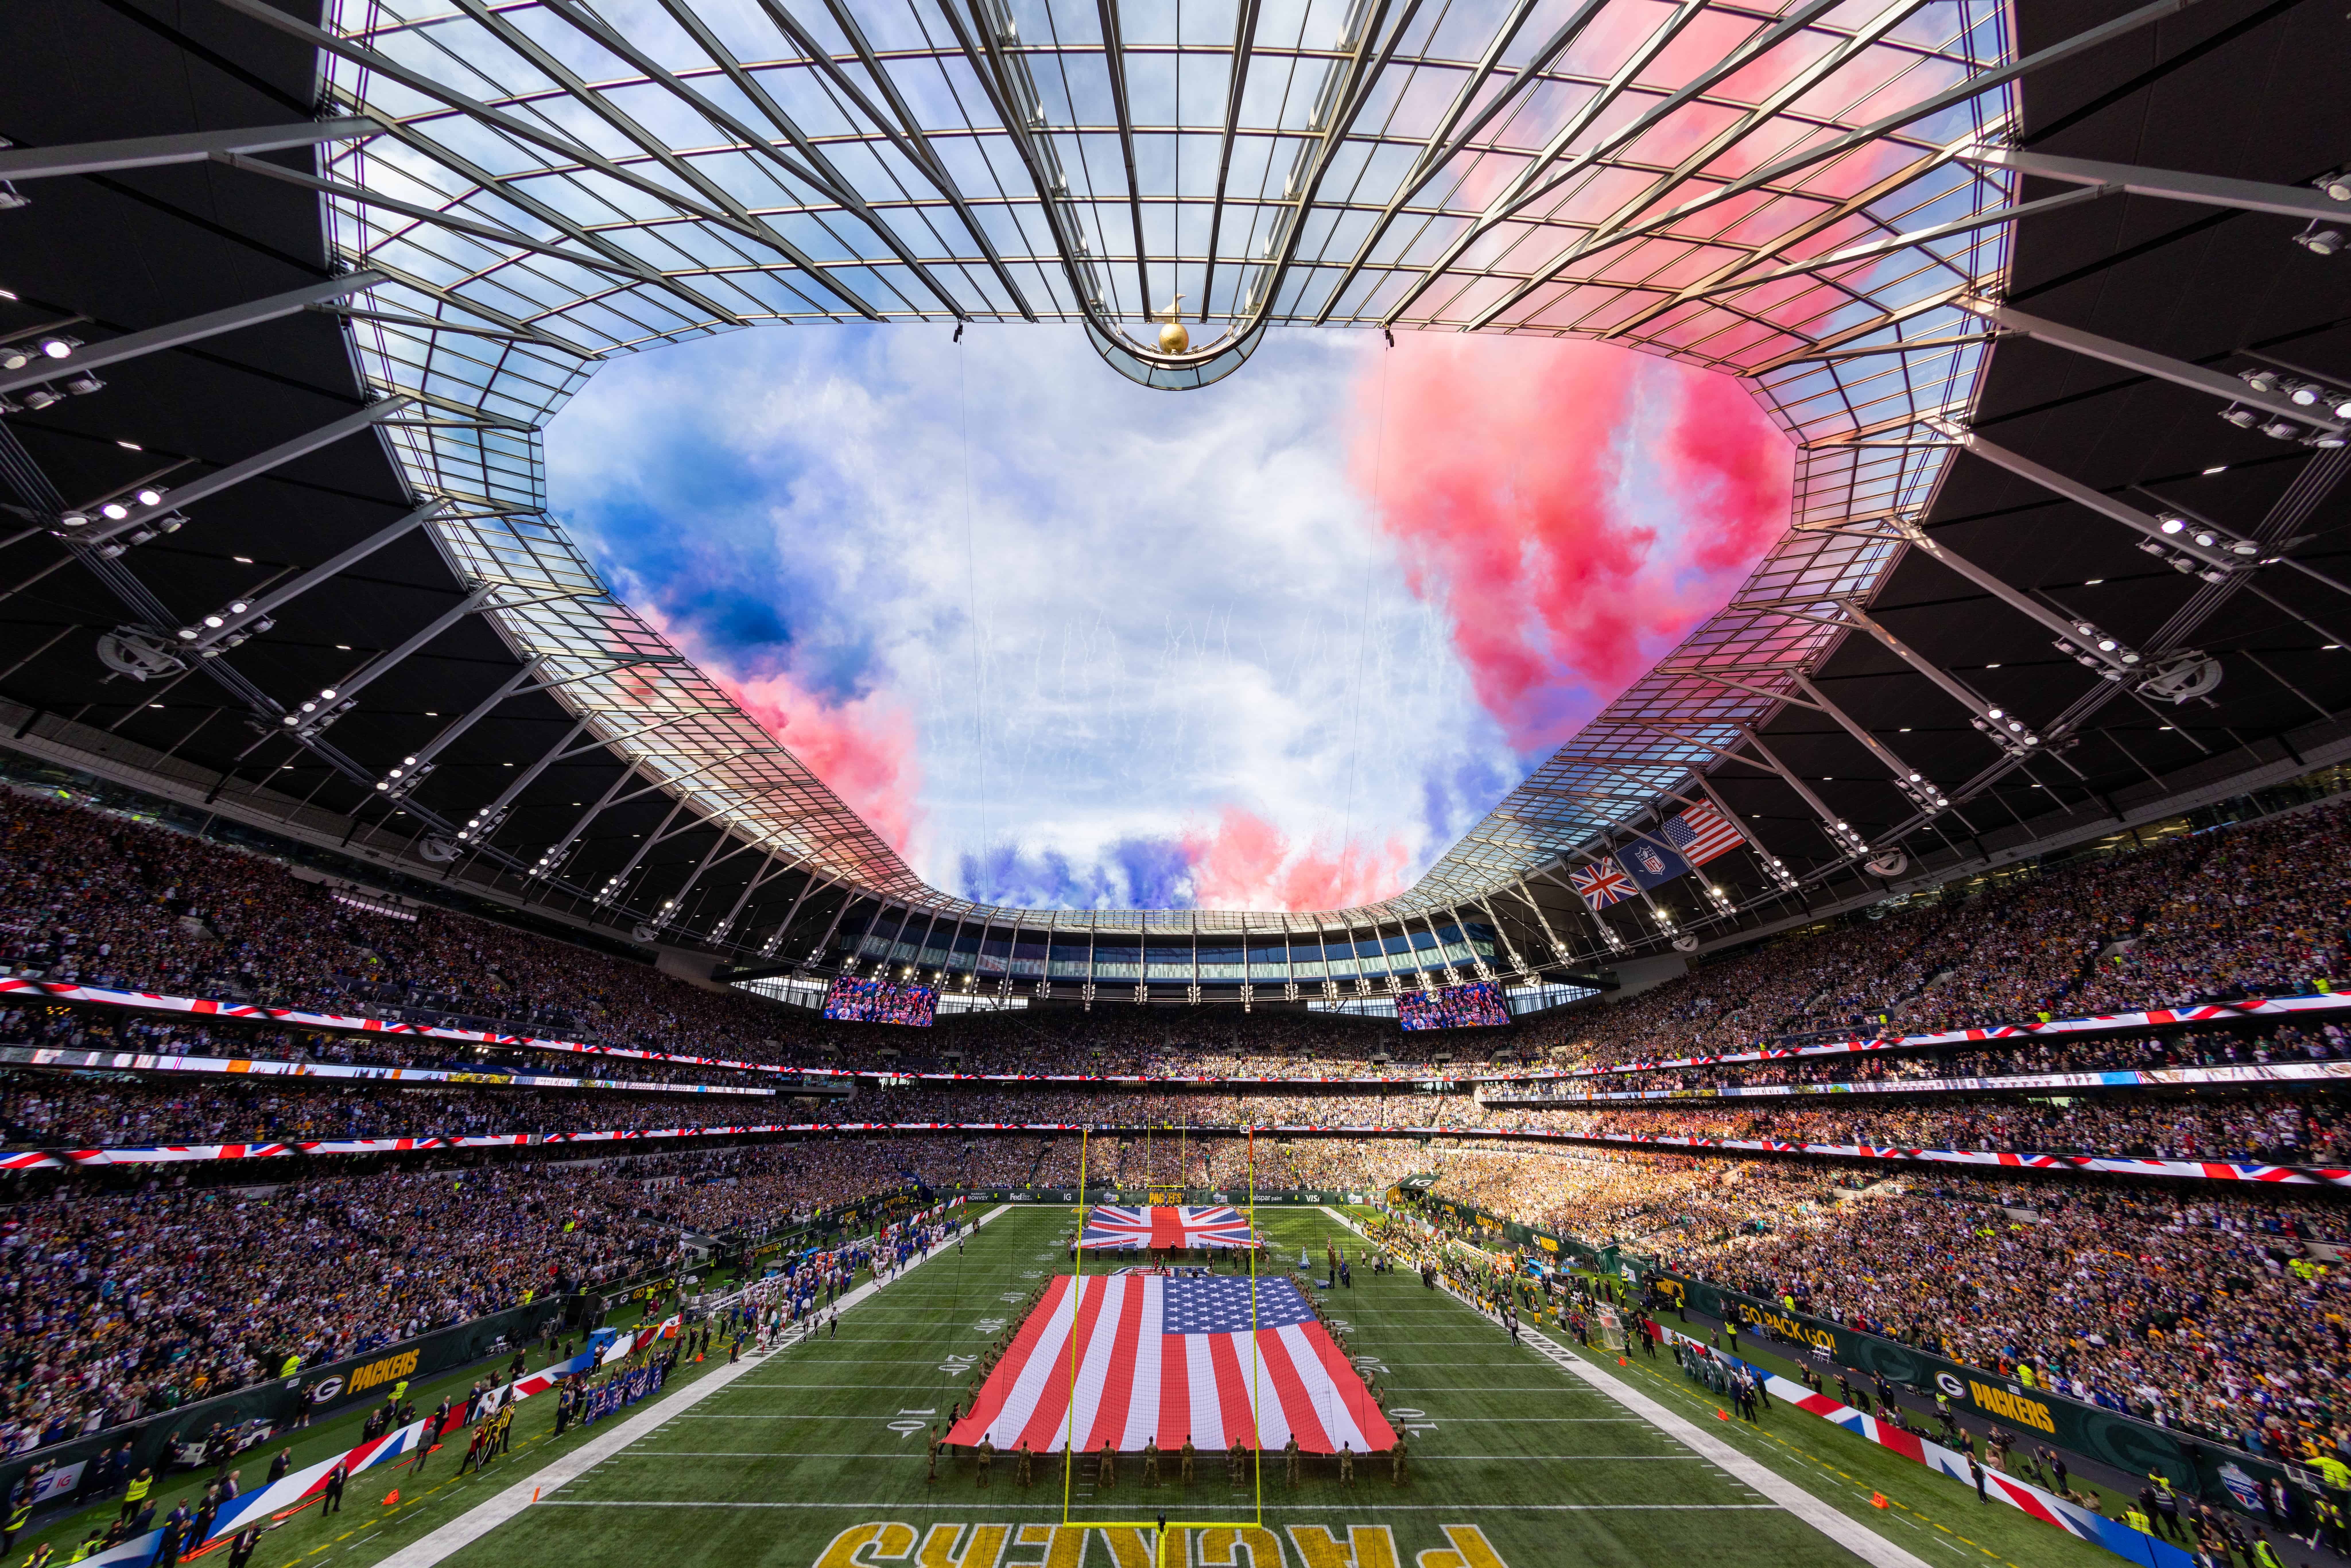 The London Tottenham Stadium is kitted out with red, blue and white flags to celebrate the NFL London Games